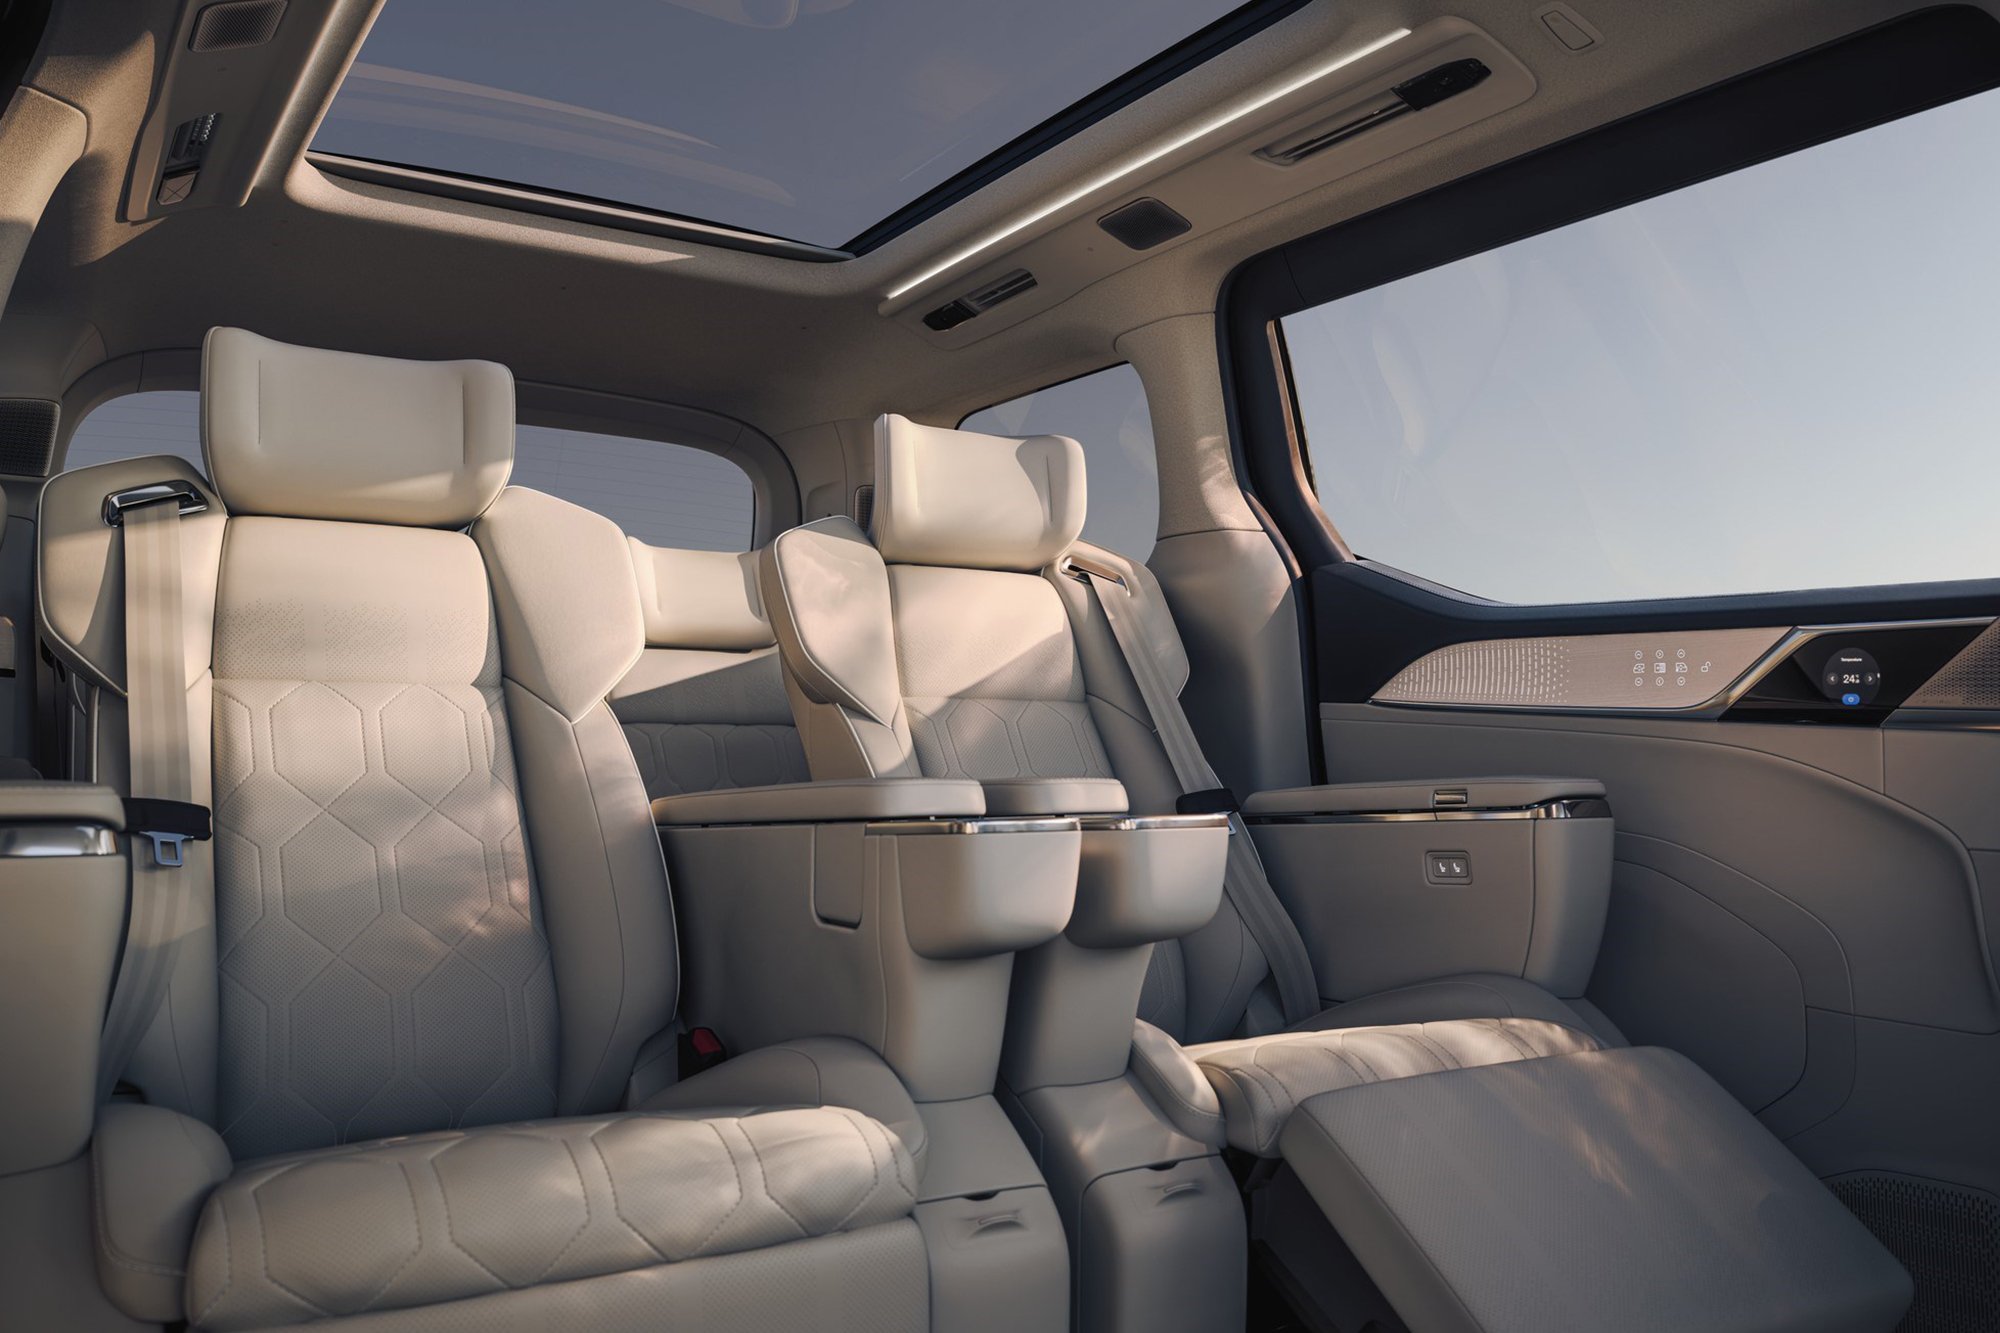 The rear seats with massage functions of the Volvo EM90